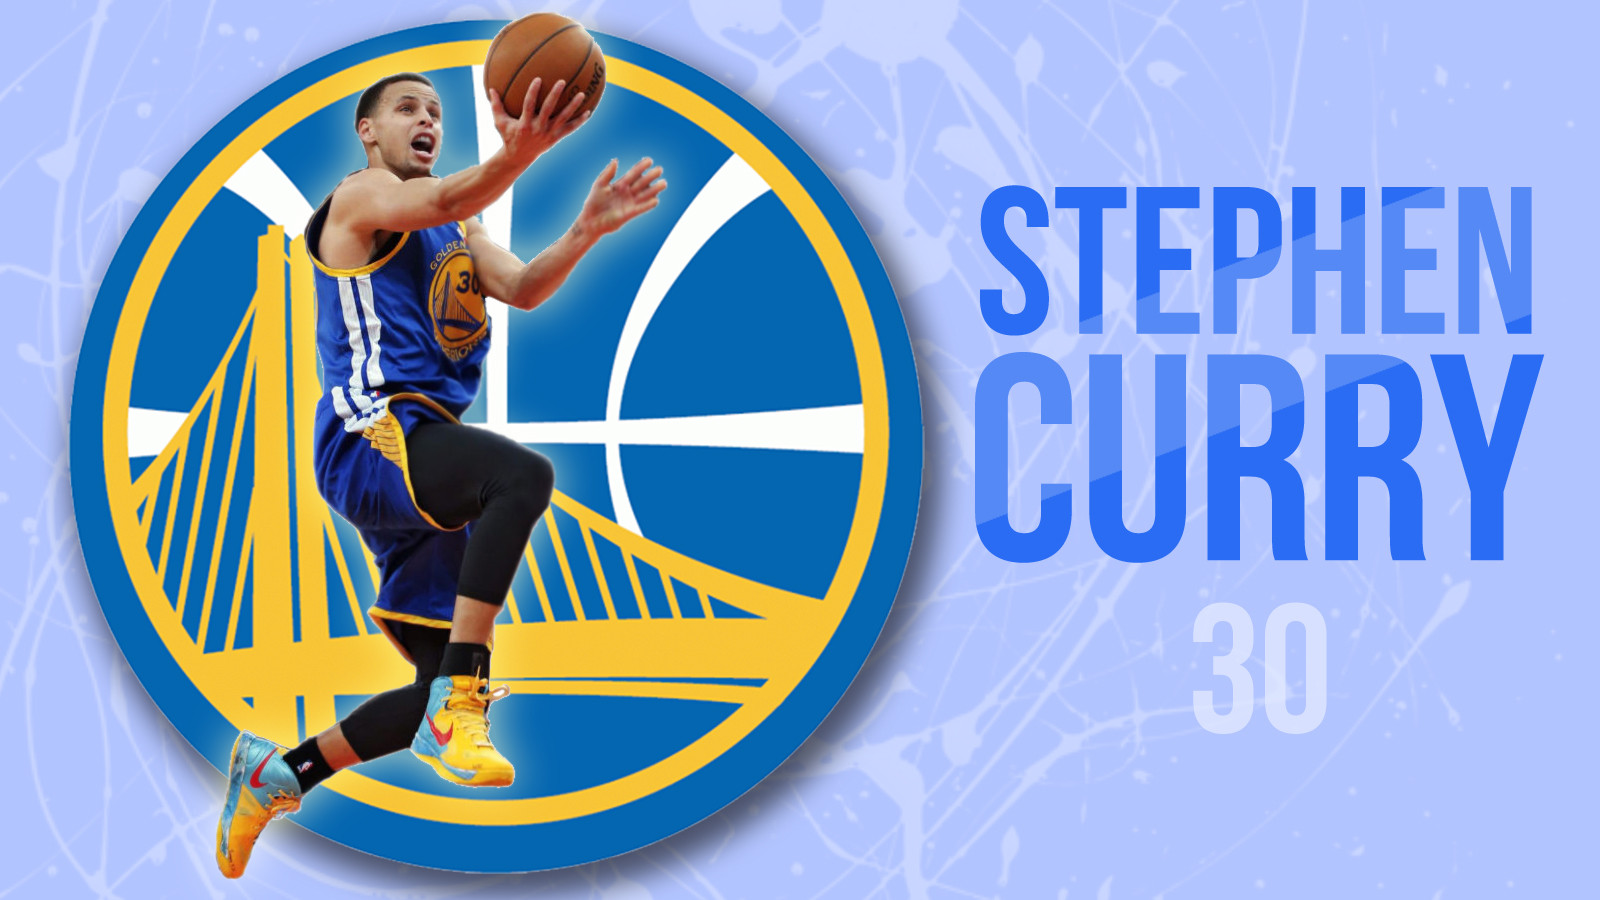 Free download Beautiful Stephen Curry Wallpaper Full HD Picture [1600x900] for your Desktop, Mobile & Tablet. Explore Stephen Curry Wallpaper. Stephen Curry Wallpaper, Wallpaper Stephen Curry, Stephen Curry Wallpaper